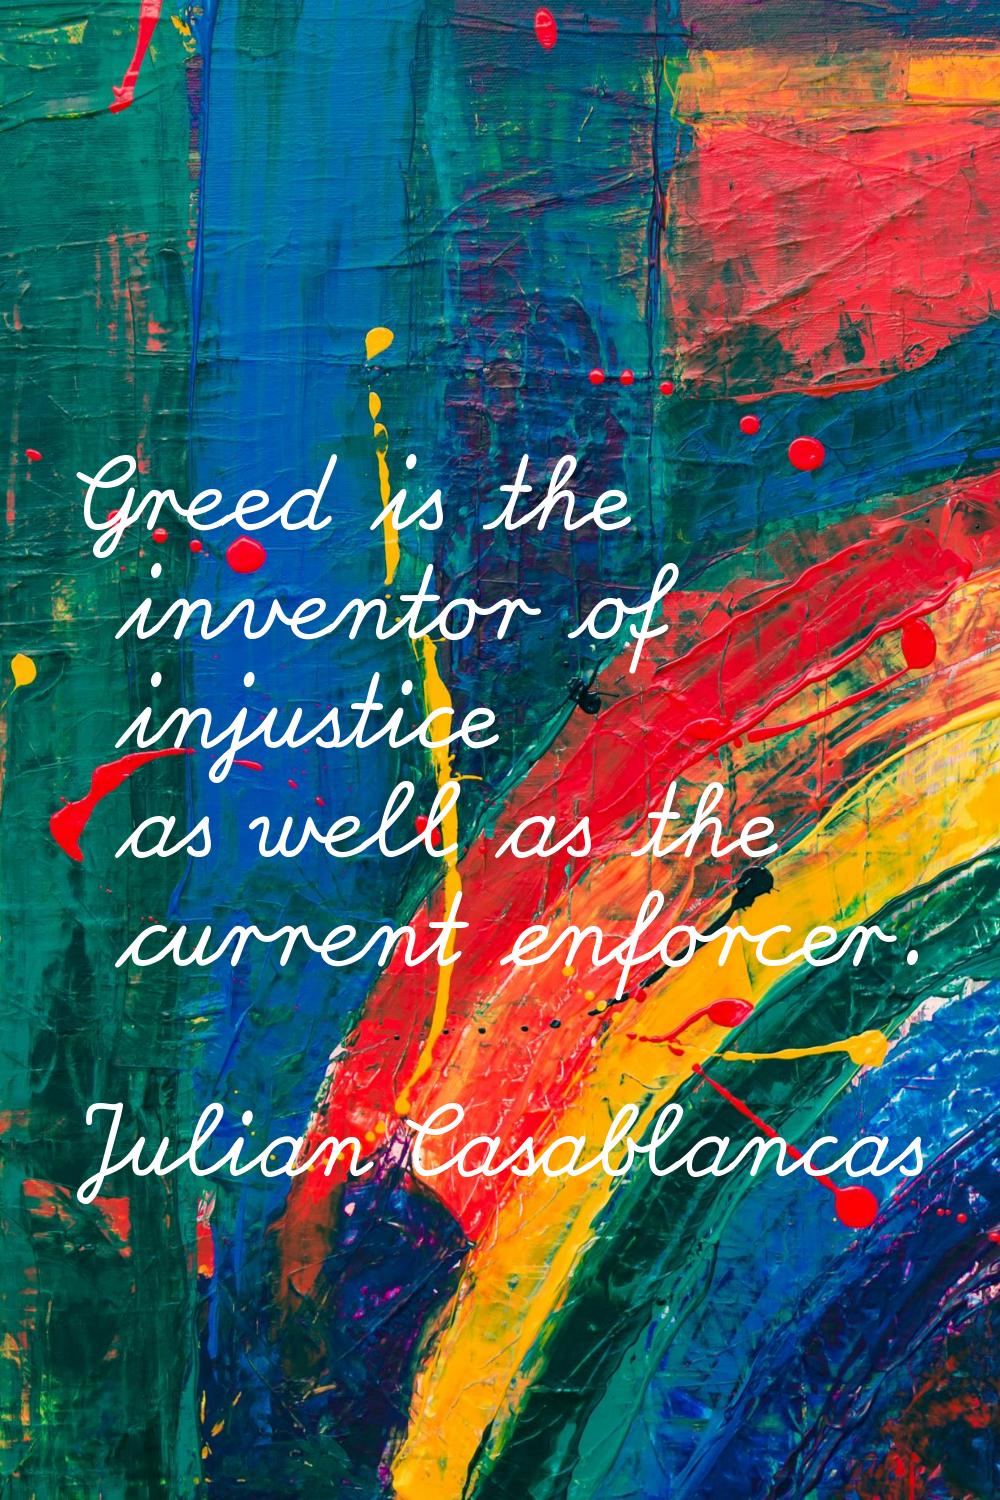 Greed is the inventor of injustice as well as the current enforcer.